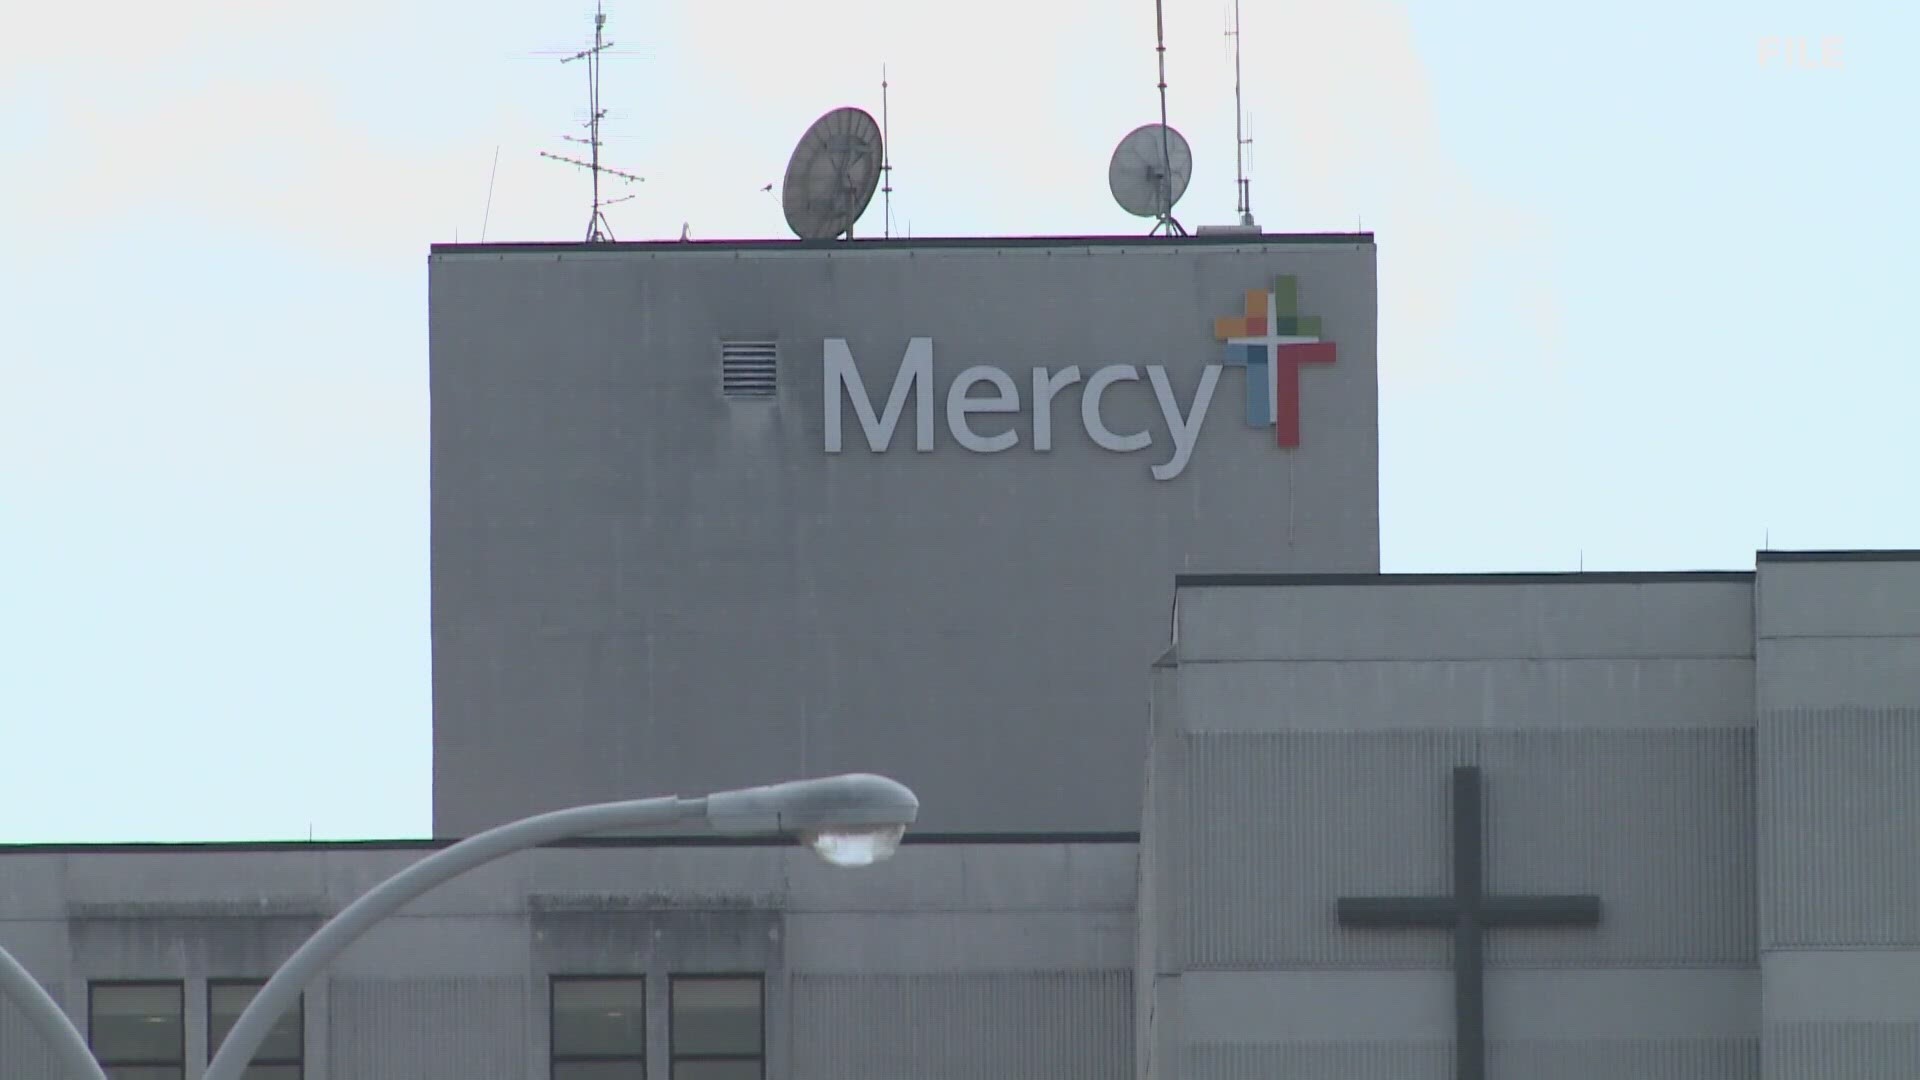 Mercy HealthCare is looking forward to the future with AI. Its goal is to lighten the load on healthcare workers and improve patient experience.